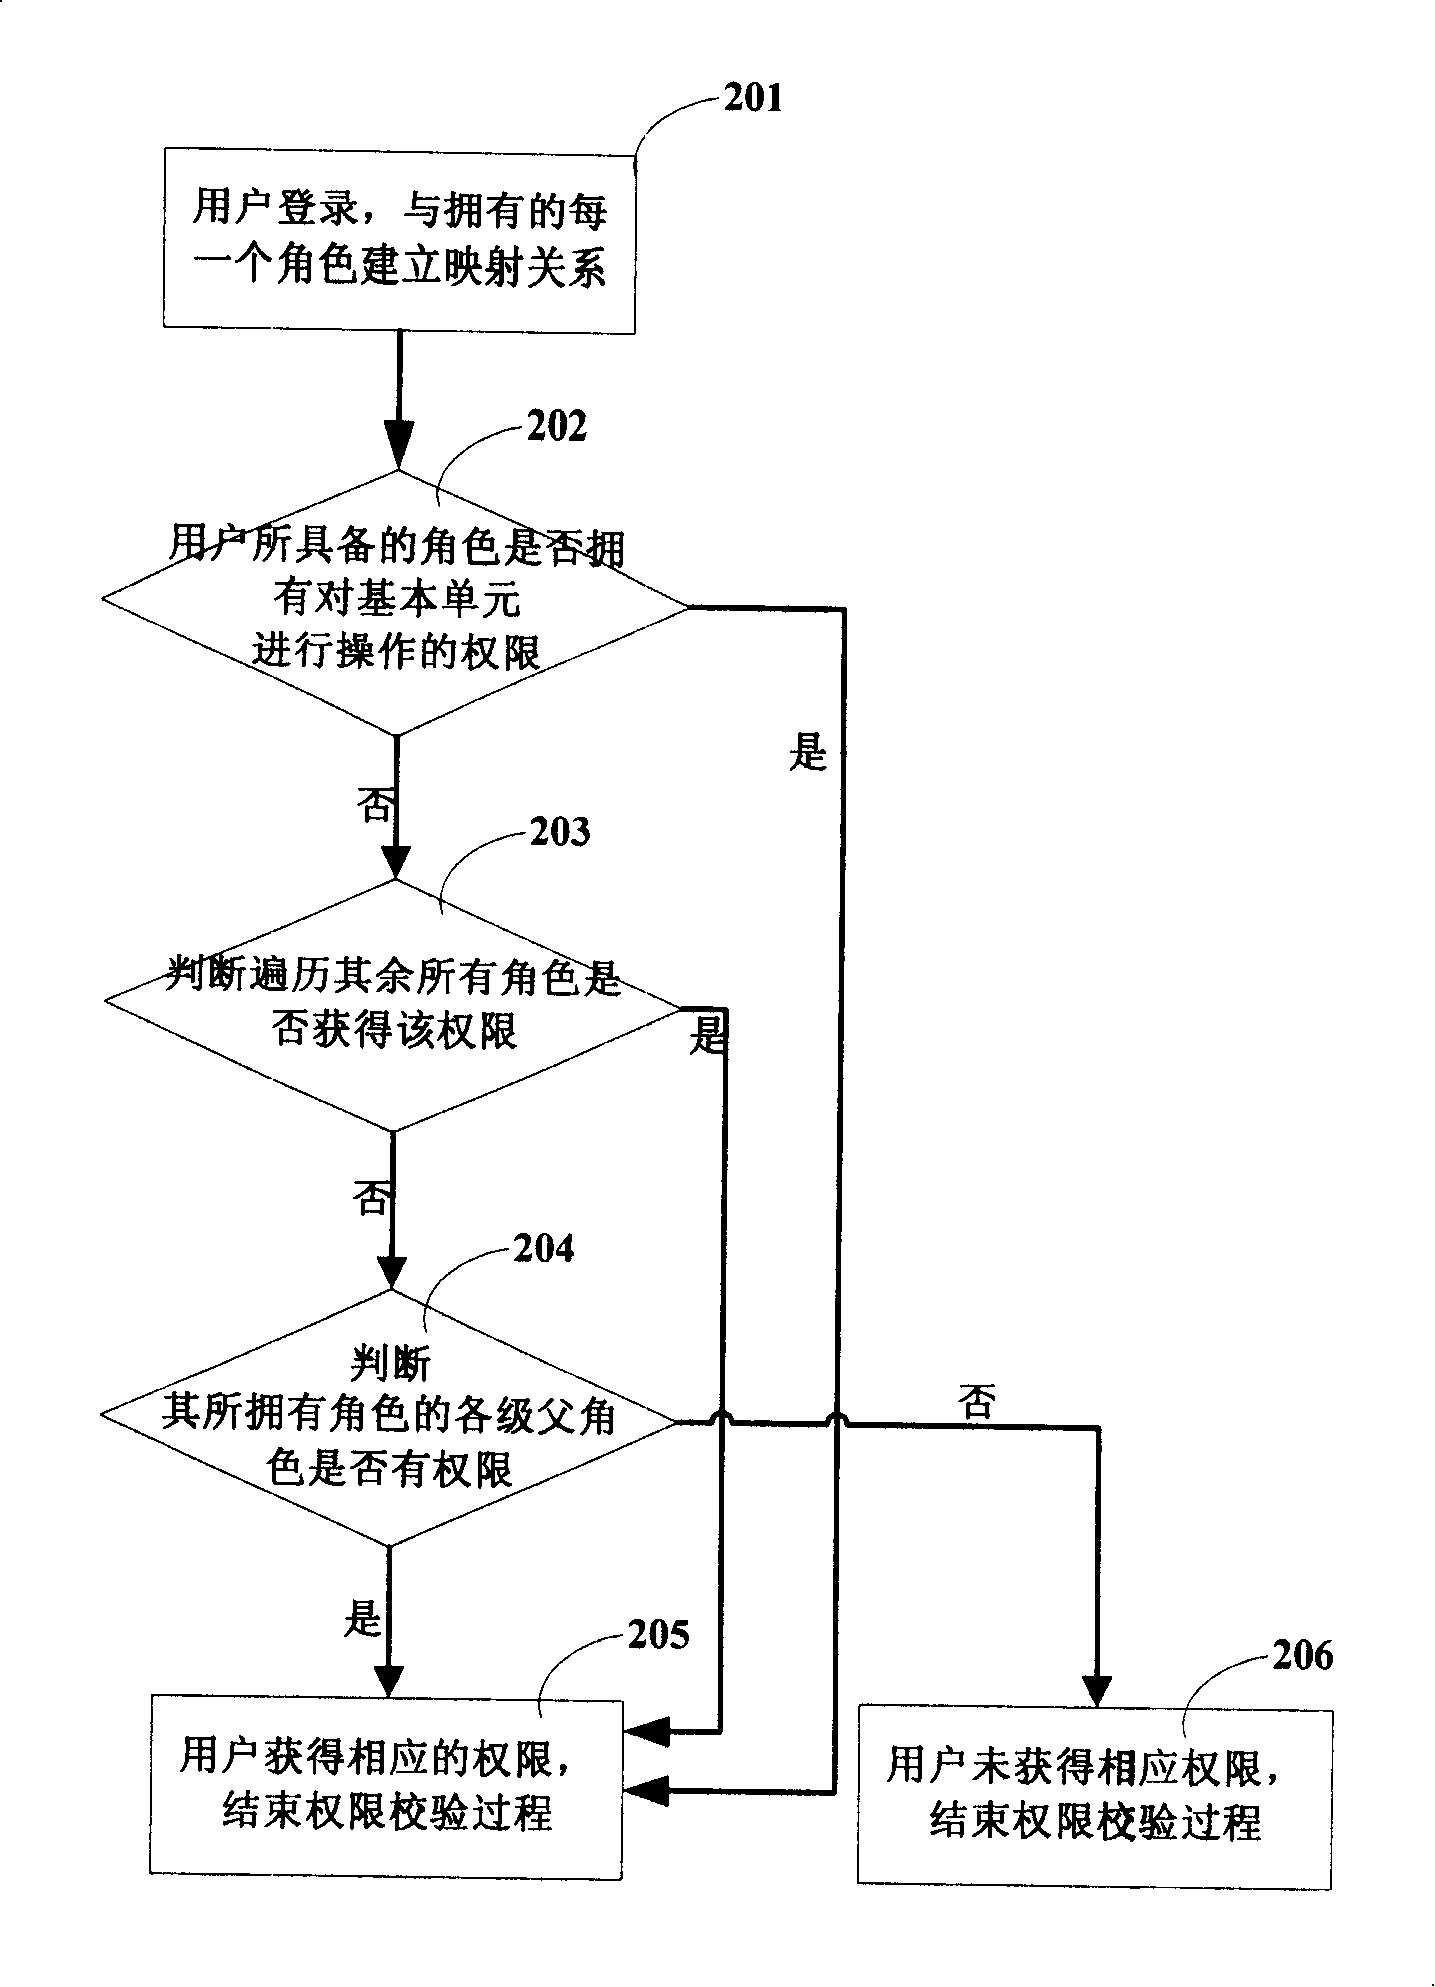 Method for controlling access authority of electric document